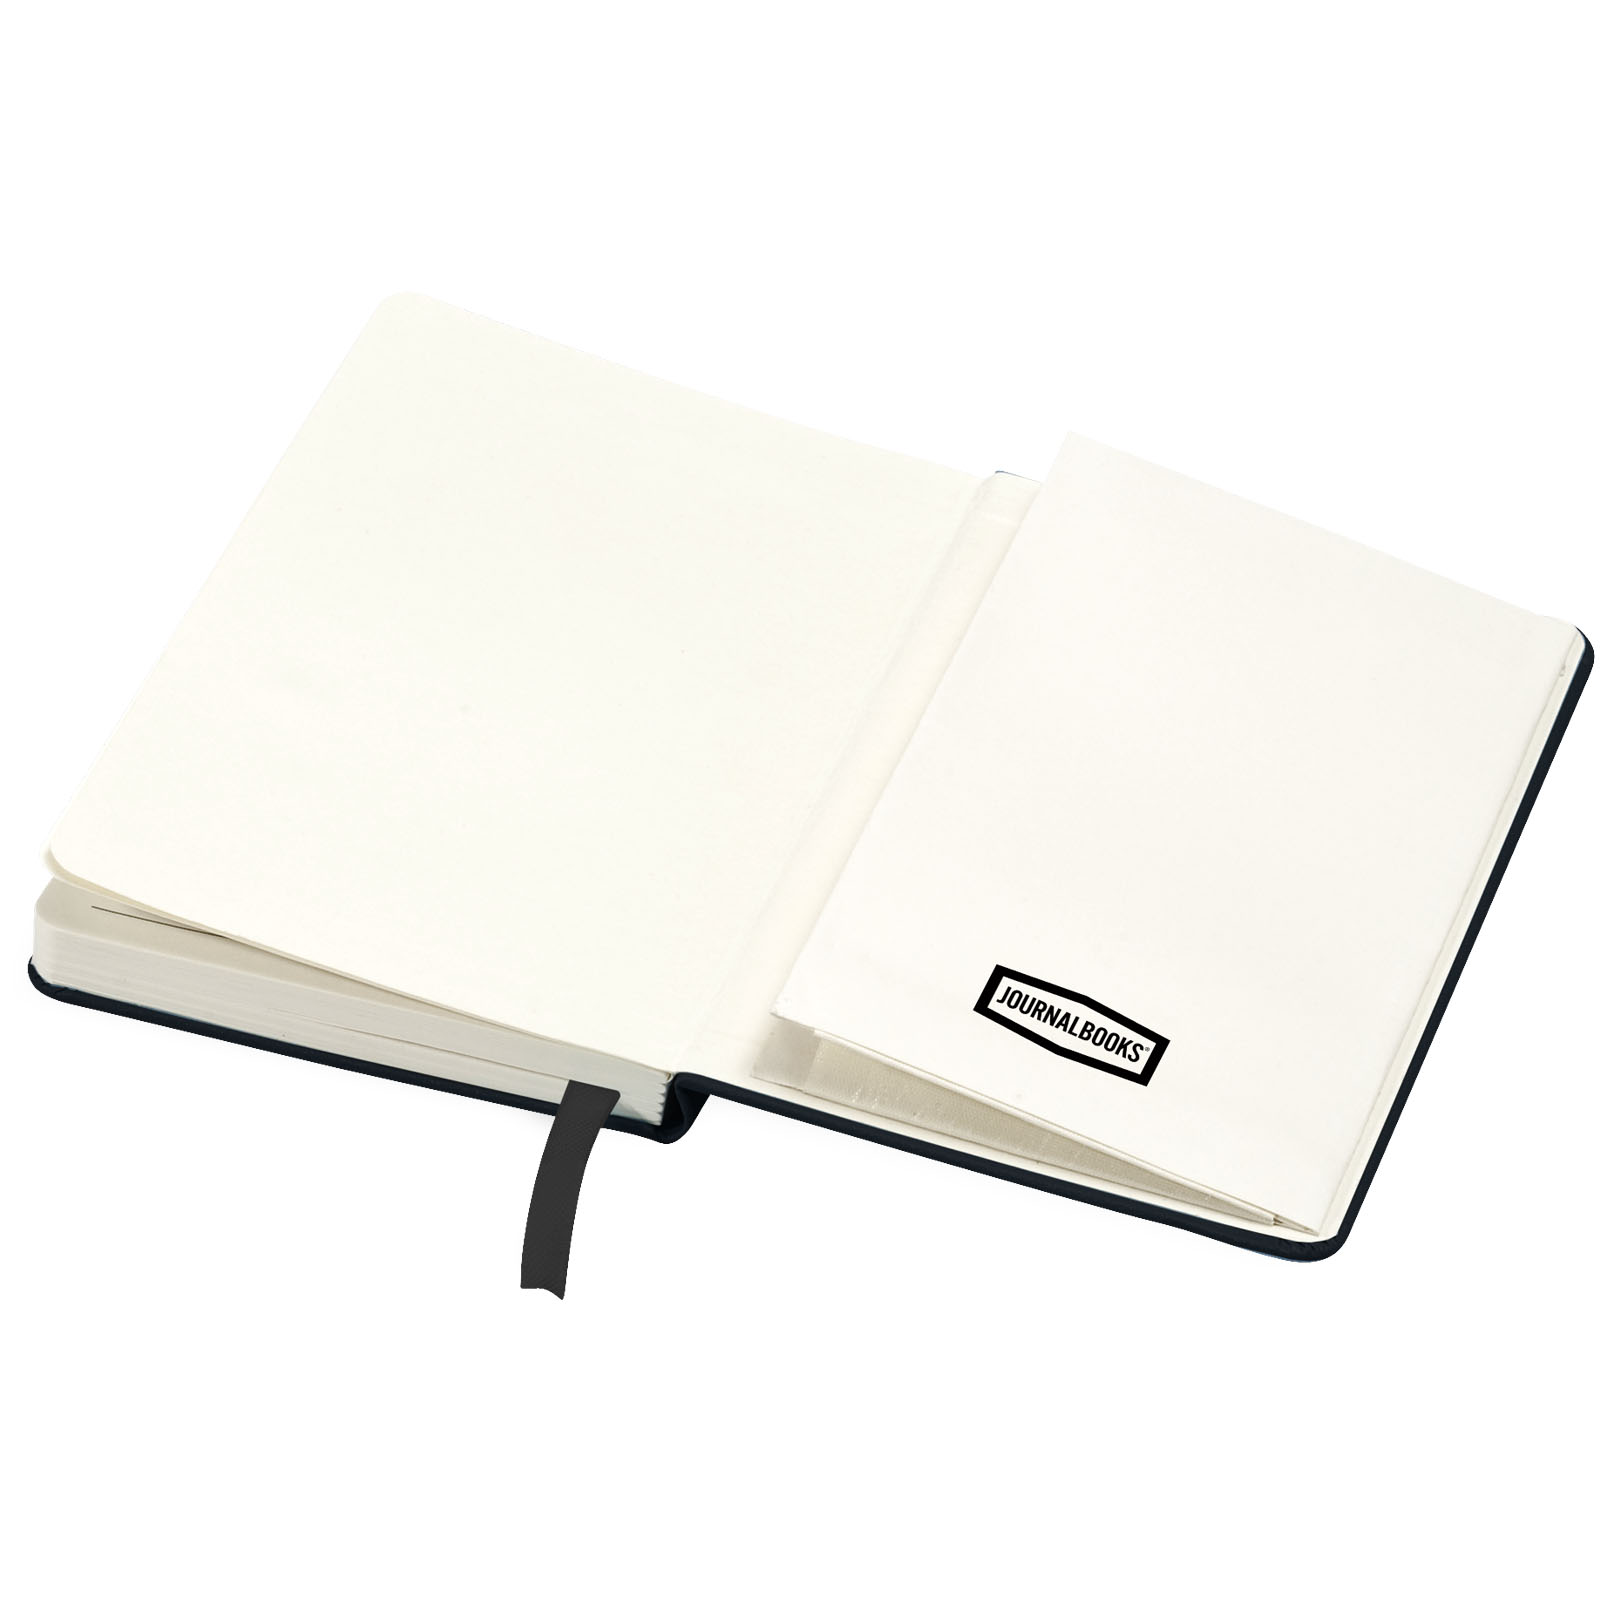 Advertising Hard cover notebooks - Classic A6 hard cover pocket notebook - 6